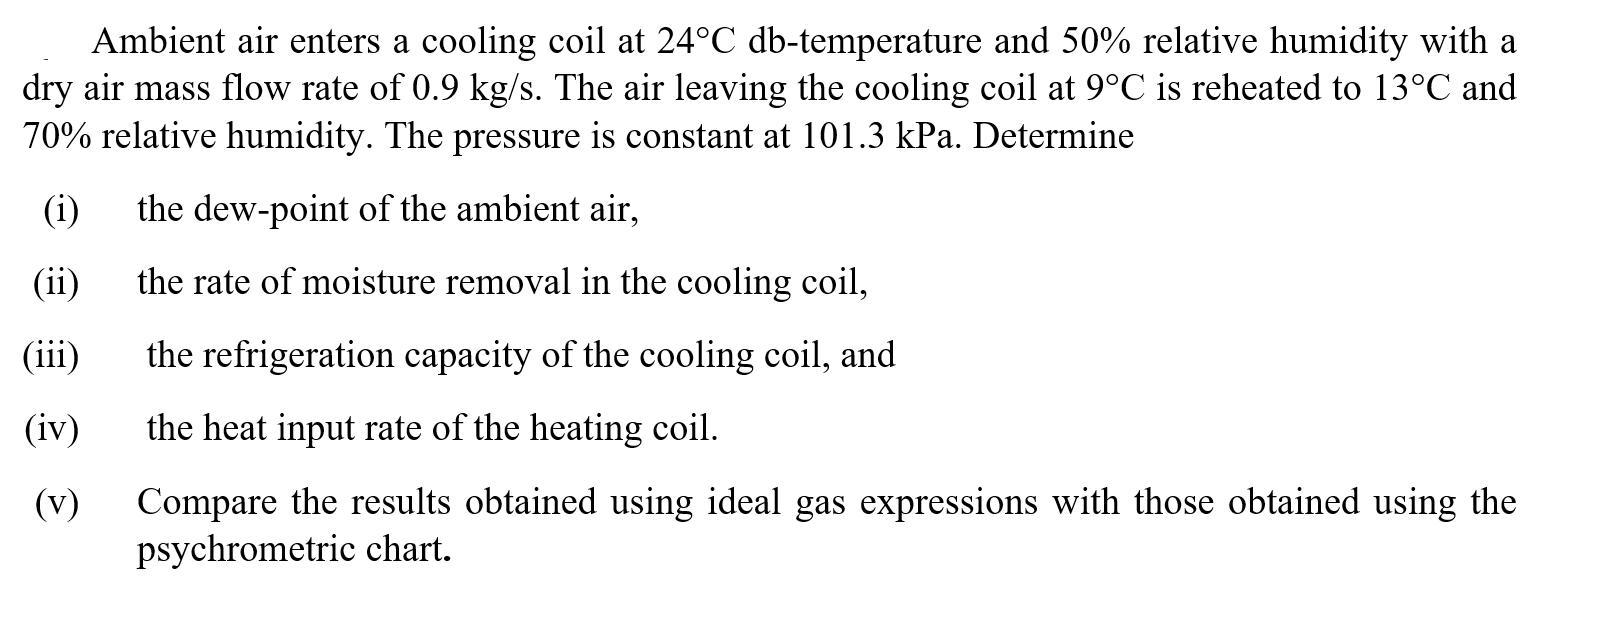 Ambient air enters a cooling coil at 24C db-temperature and 50% relative humidity with a dry air mass flow